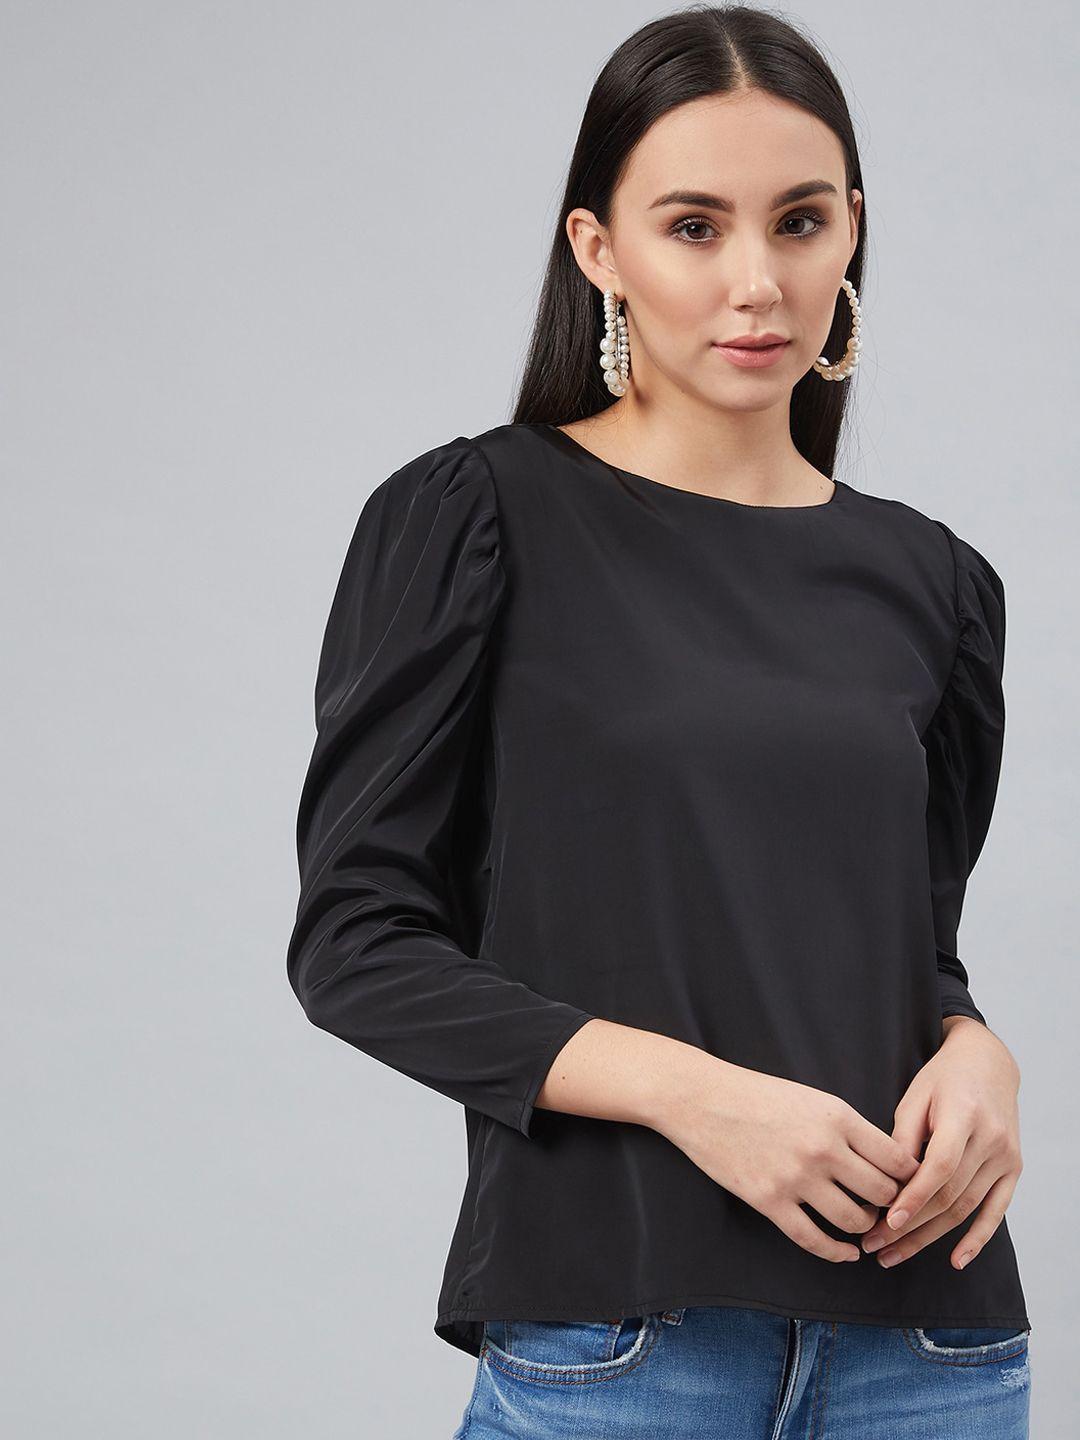 marie-claire-women-black-solid-top